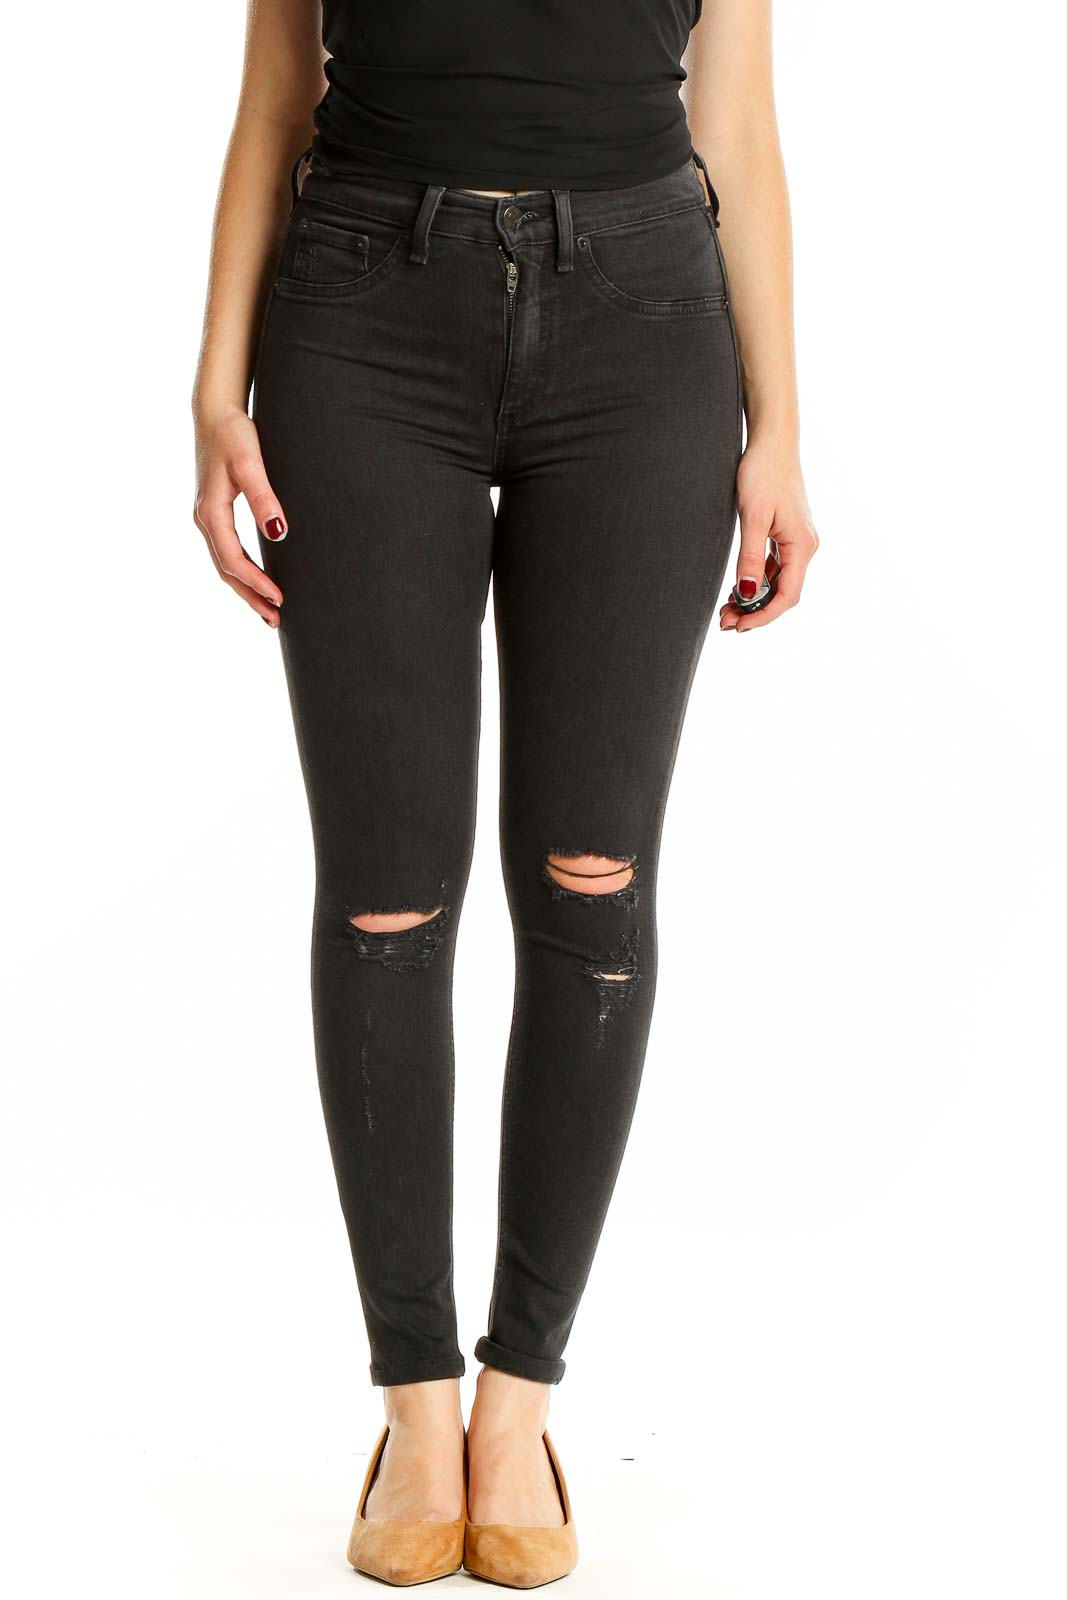 Black Ripped Skinny Jeans Front